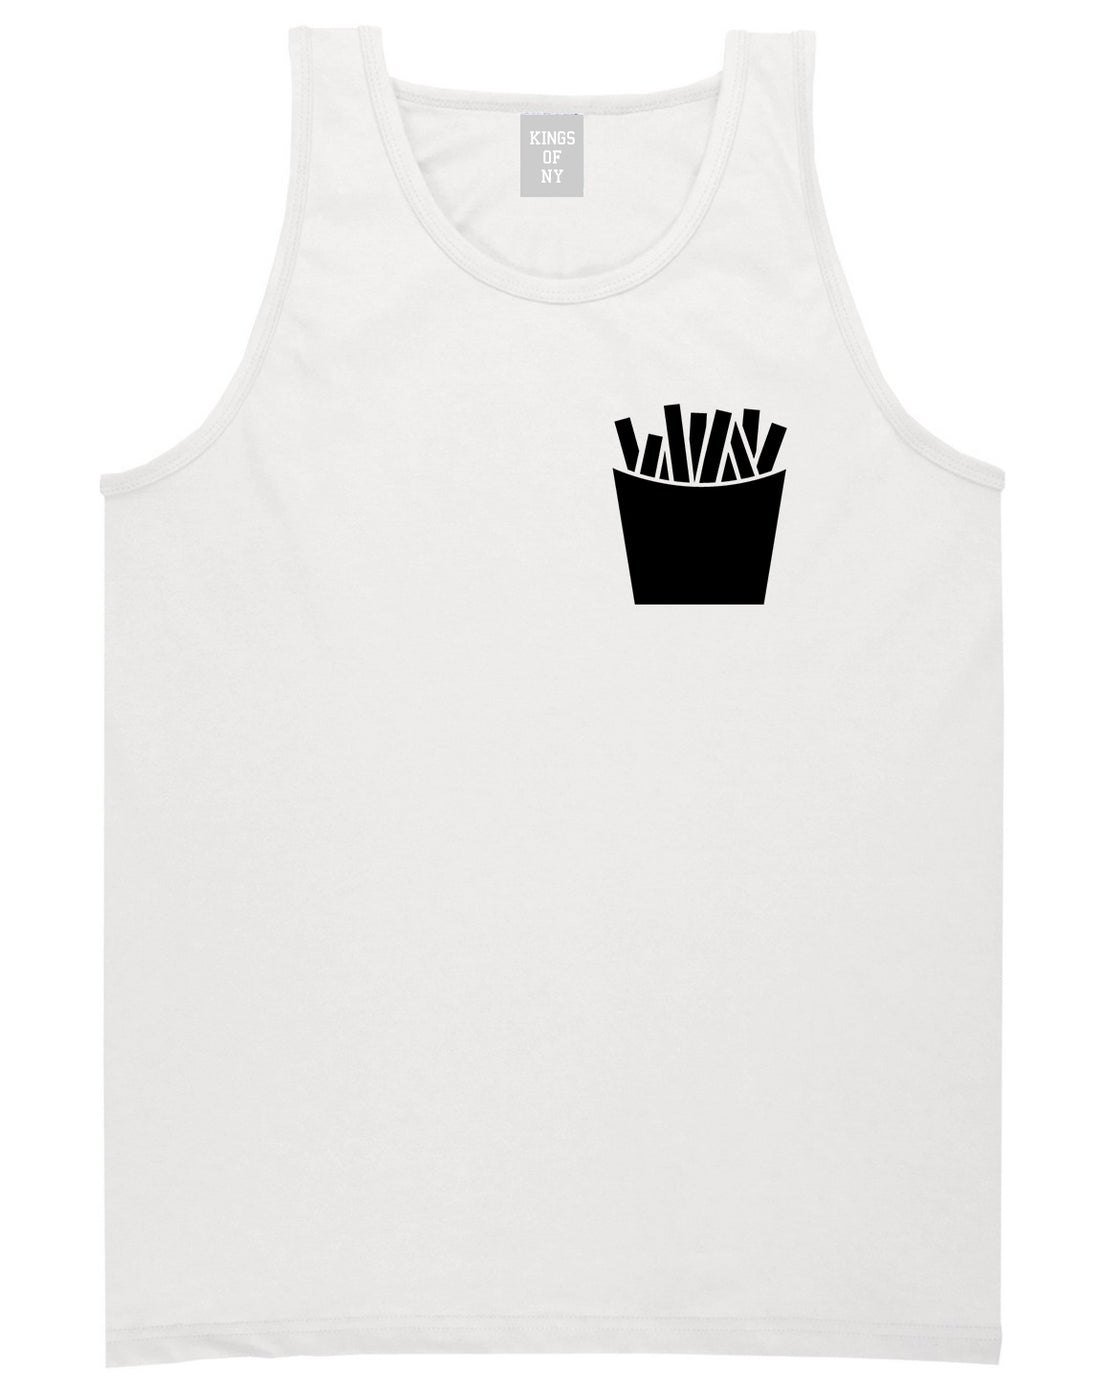 French Fry Fries Chest Mens White Tank Top Shirt by KINGS OF NY